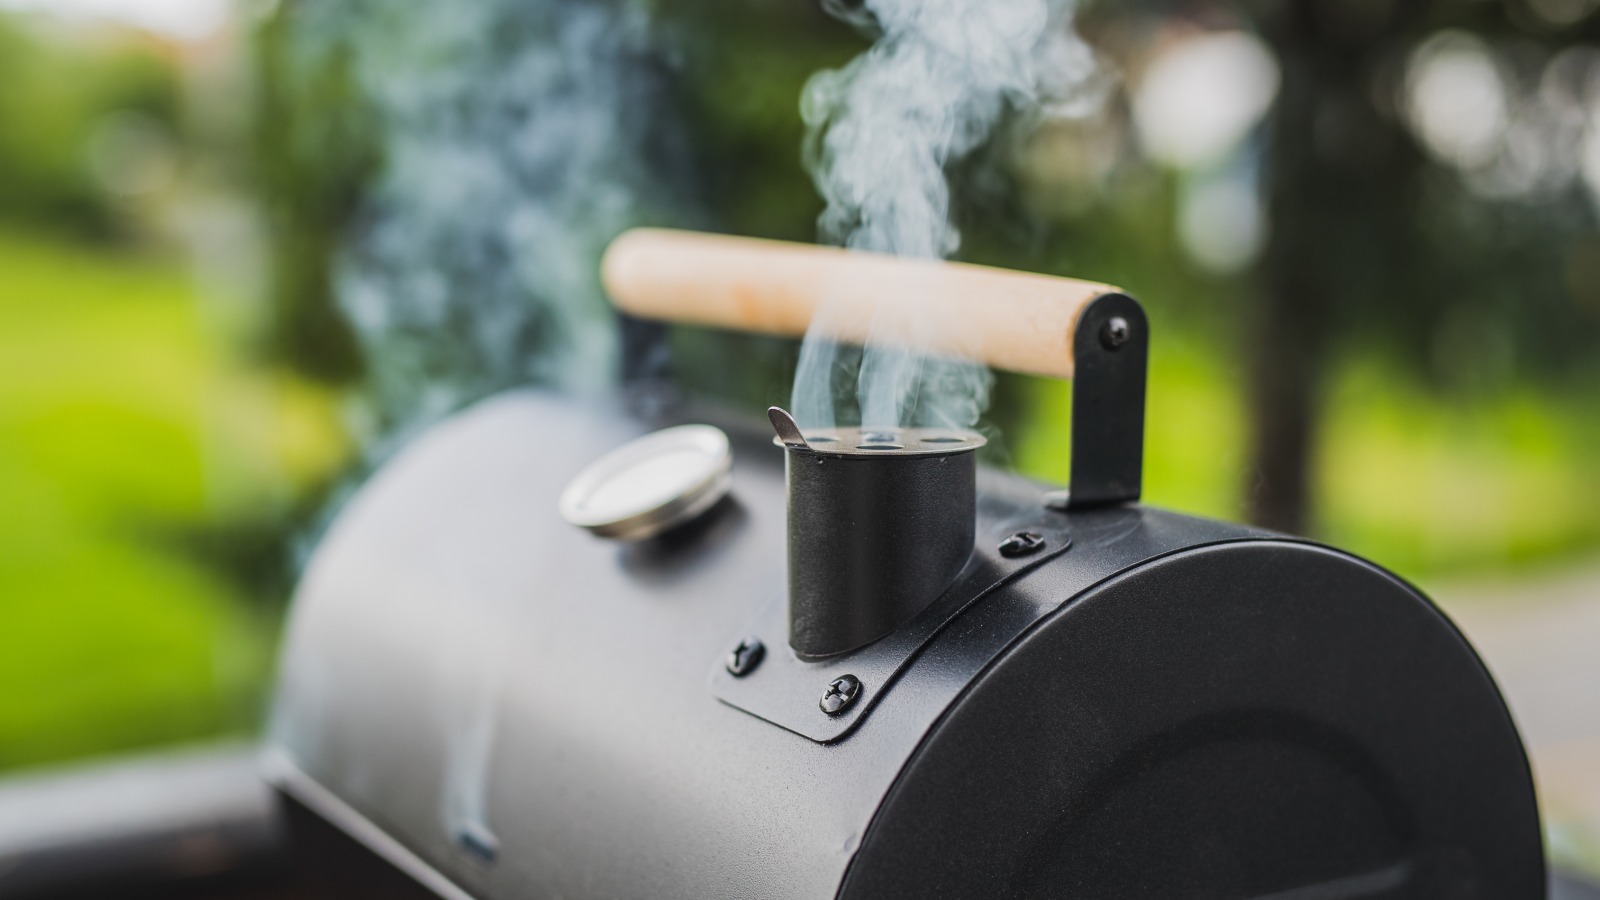 What to Avoid with a Smoker: 7 No-No’s for Home Cooks